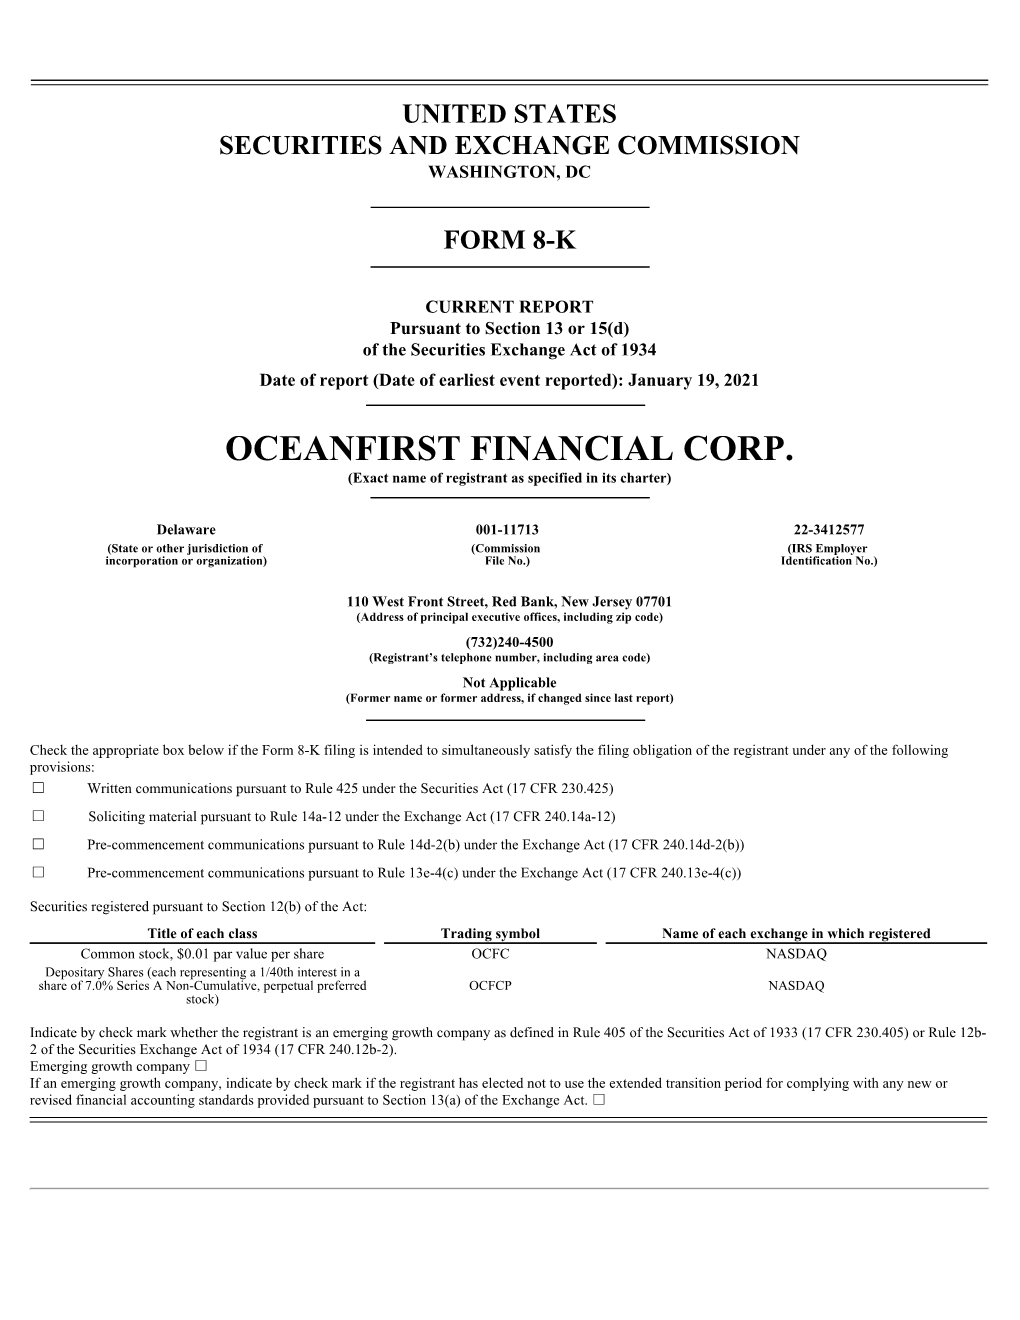 OCEANFIRST FINANCIAL CORP. (Exact Name of Registrant As Specified in Its Charter)